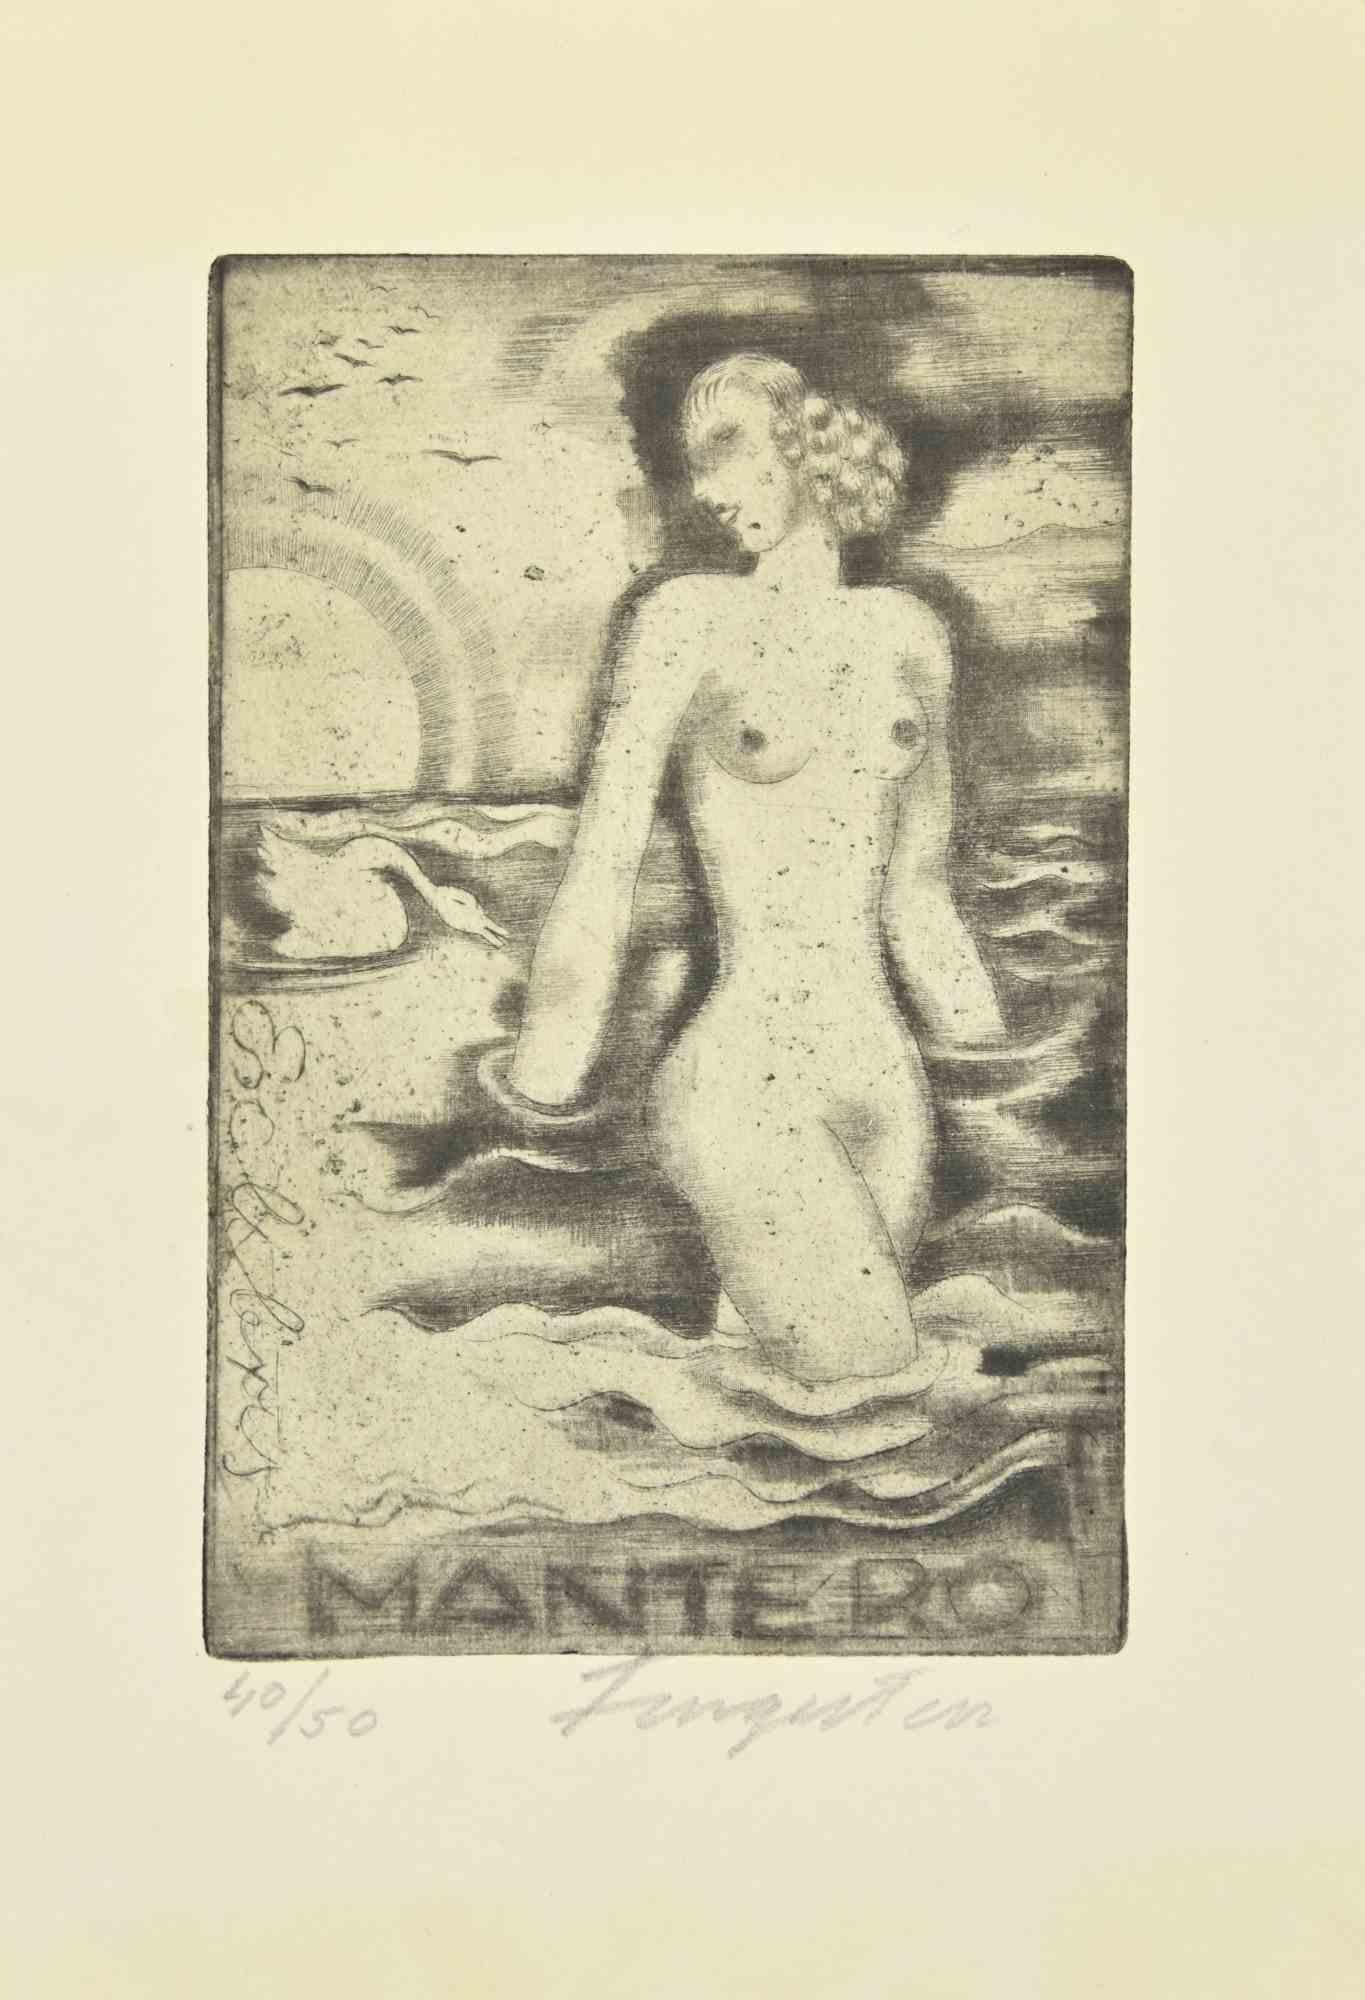 Ex Libris - Mantero is an Etching print created by  Michel Fingesten.

Hand Signed on the right margin. Numbered on the left corner ex. 40/50. 

The work is glued on cardboard.

Total dimensions: cm 31x24

Very good condition.

Michel Fingesten